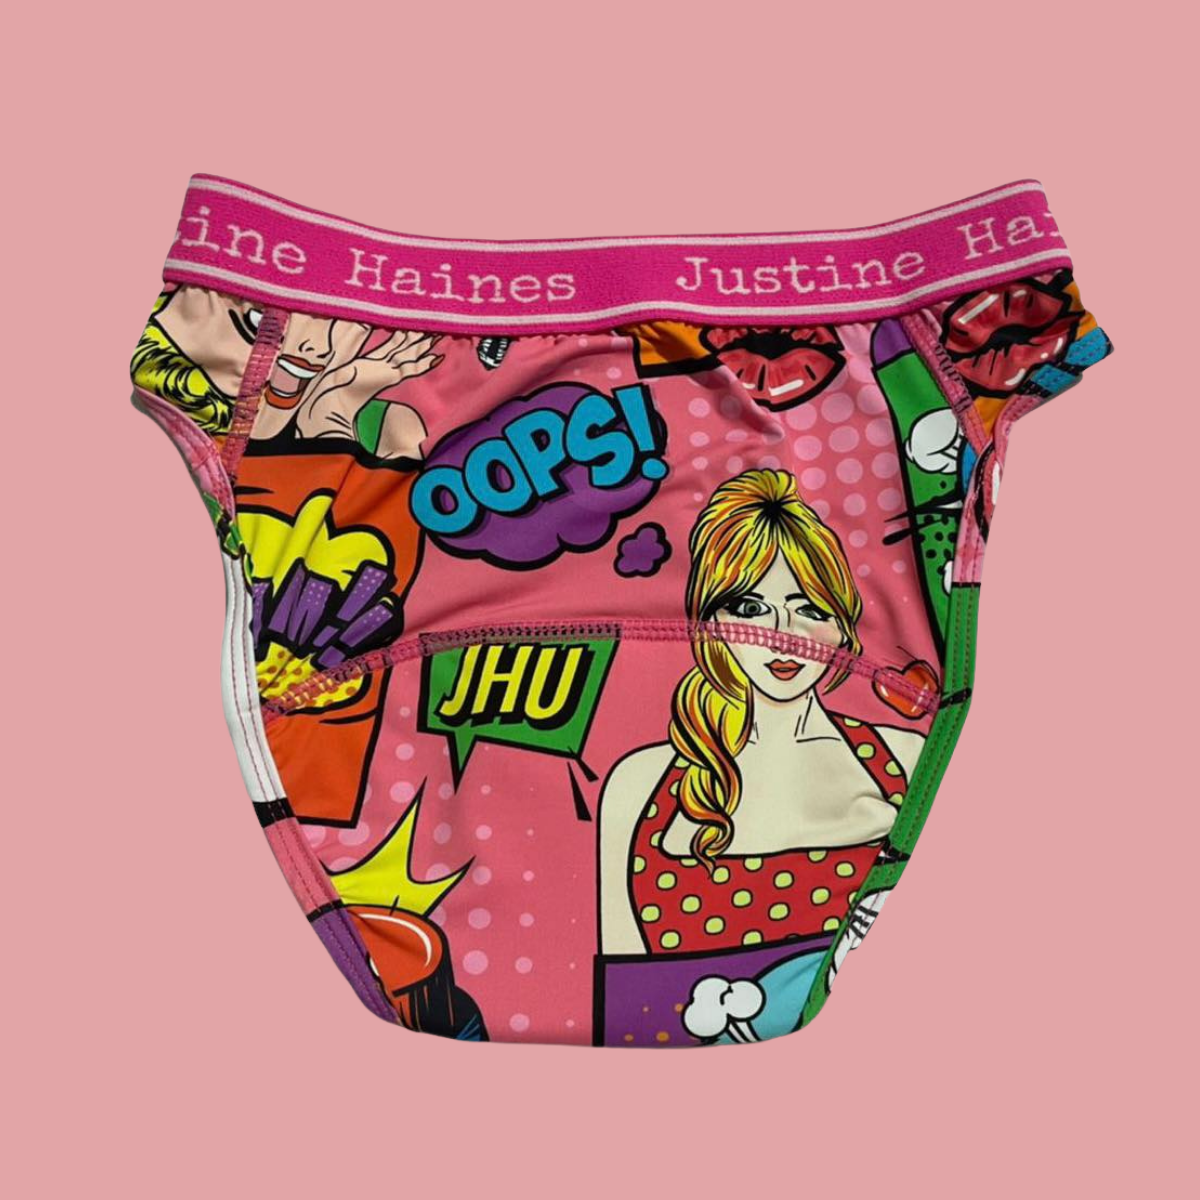 Low-Rise Period Panties in Pink Bubble Gum – Justine Haines